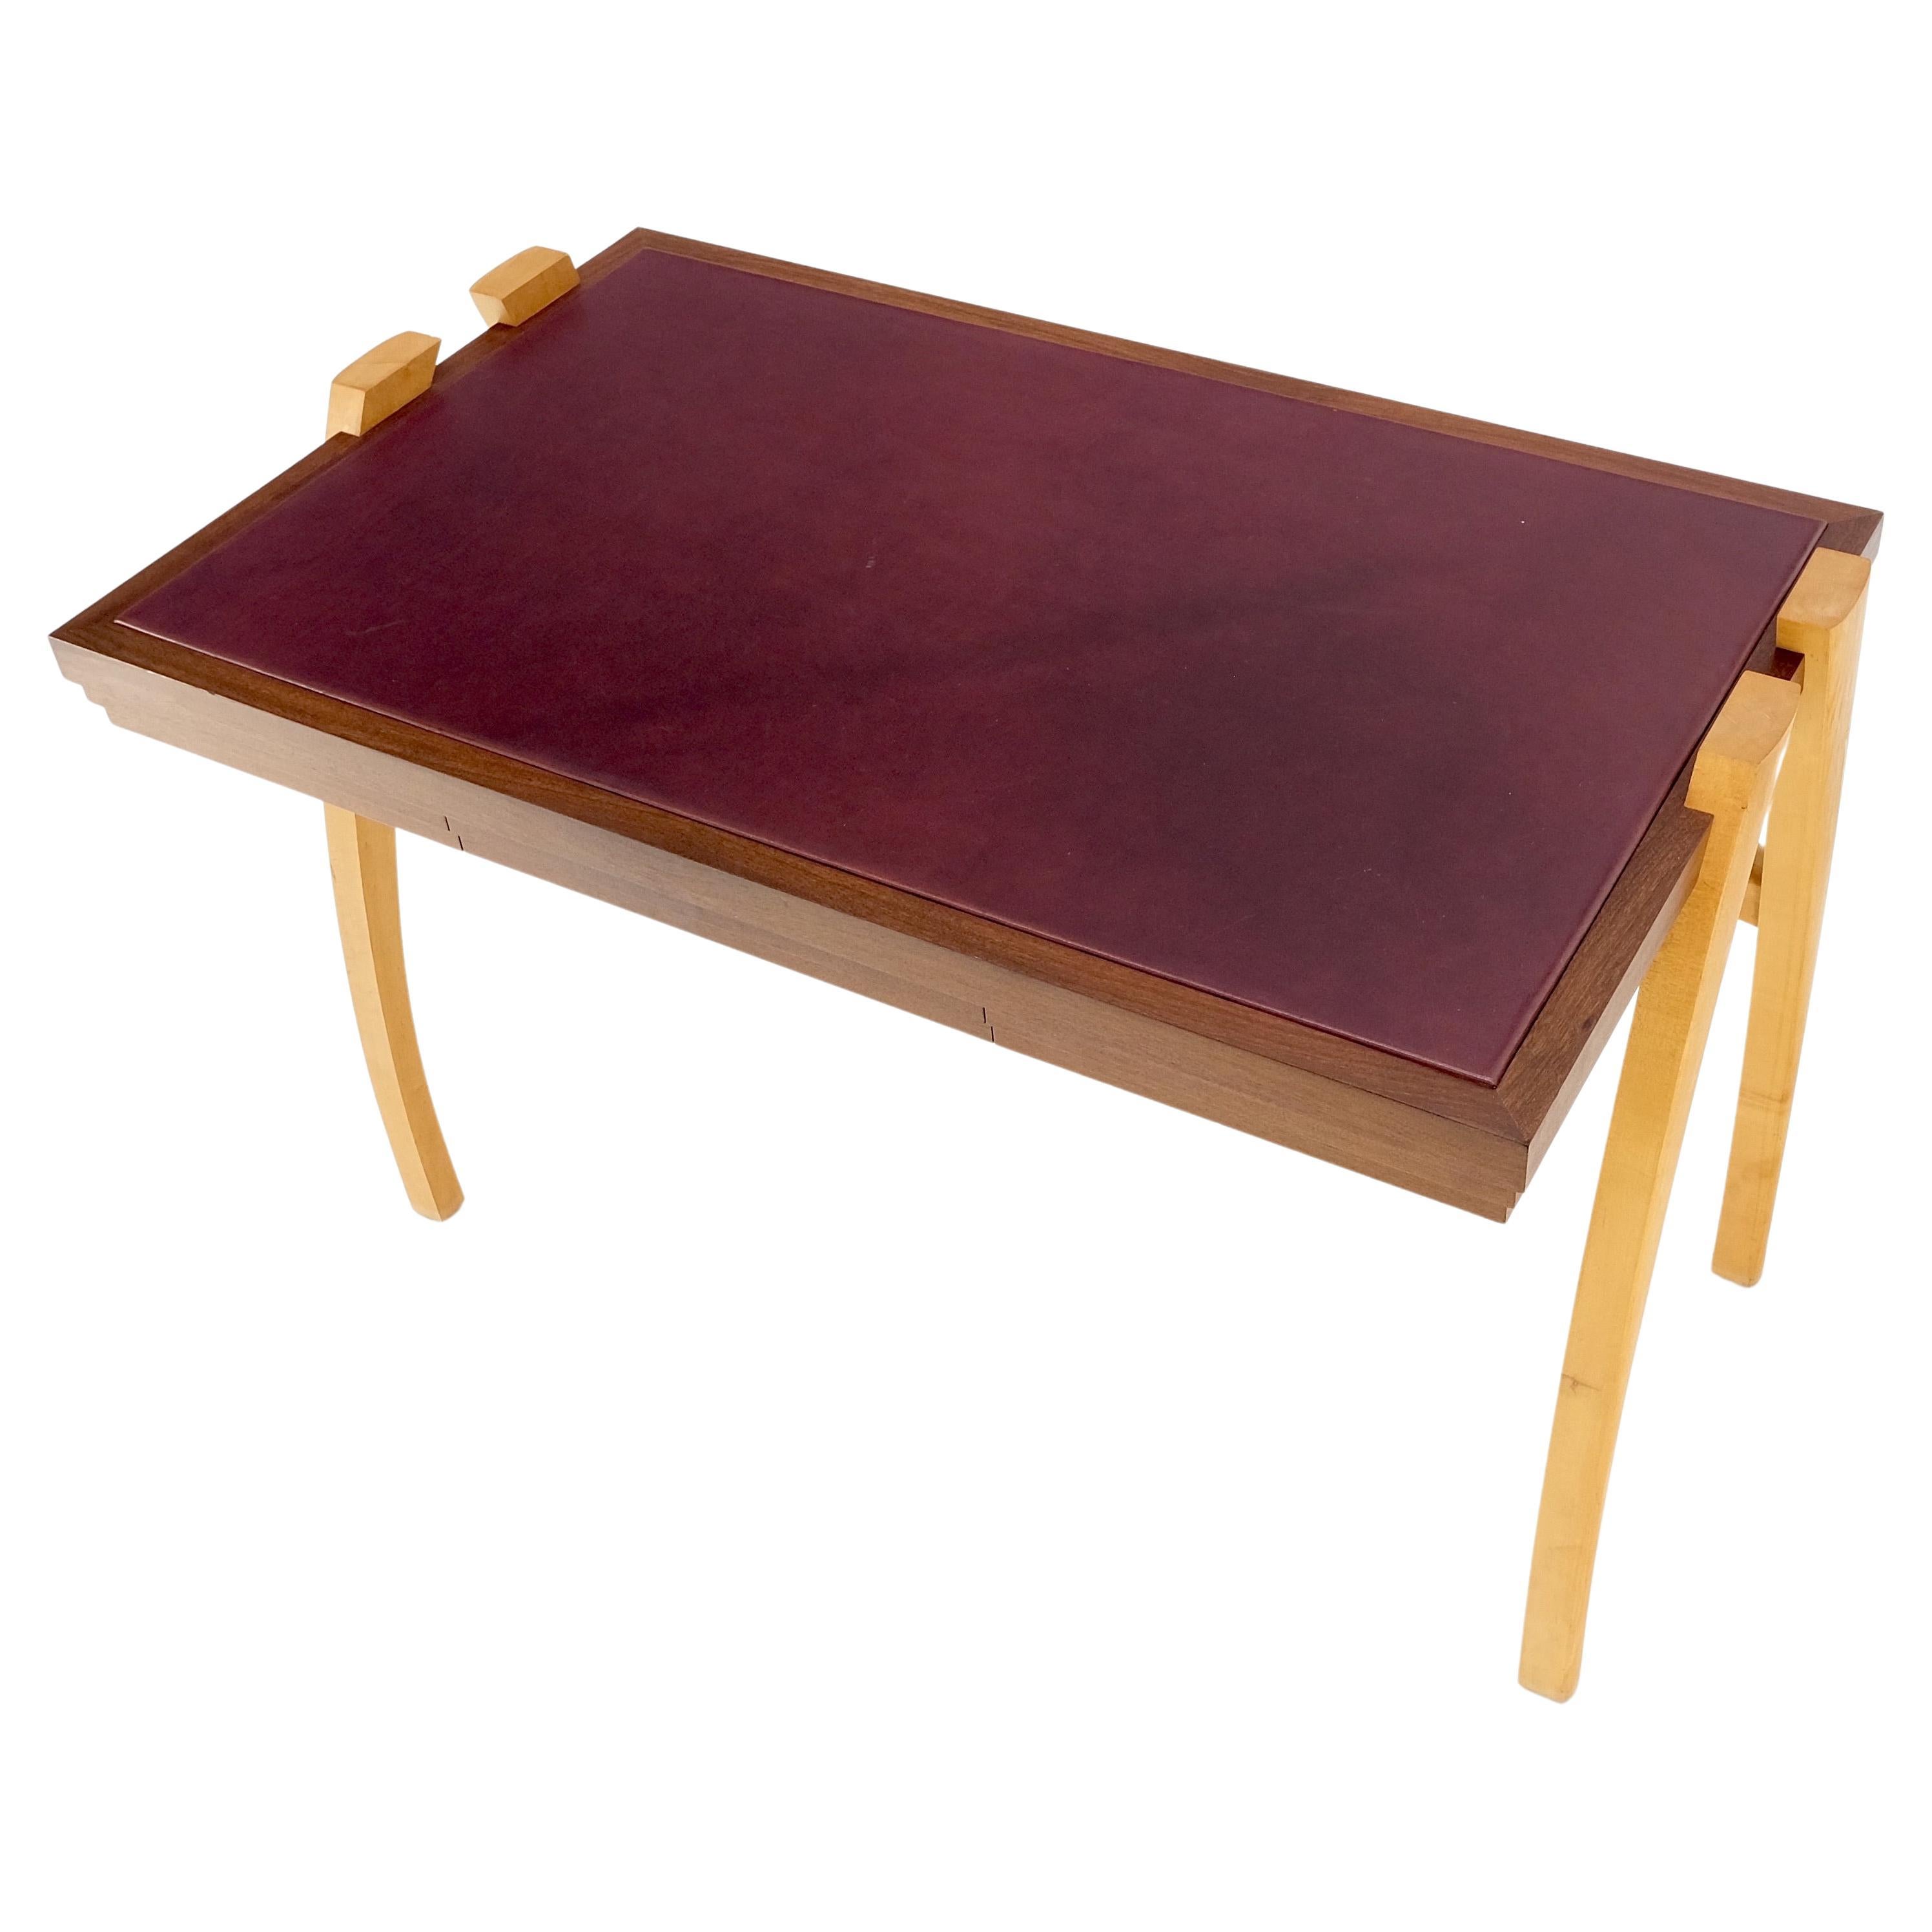 Lacquered Low Profile One Drawer Mid-Century Modern Burgundy Leather Top Blonde Desk Mint! For Sale